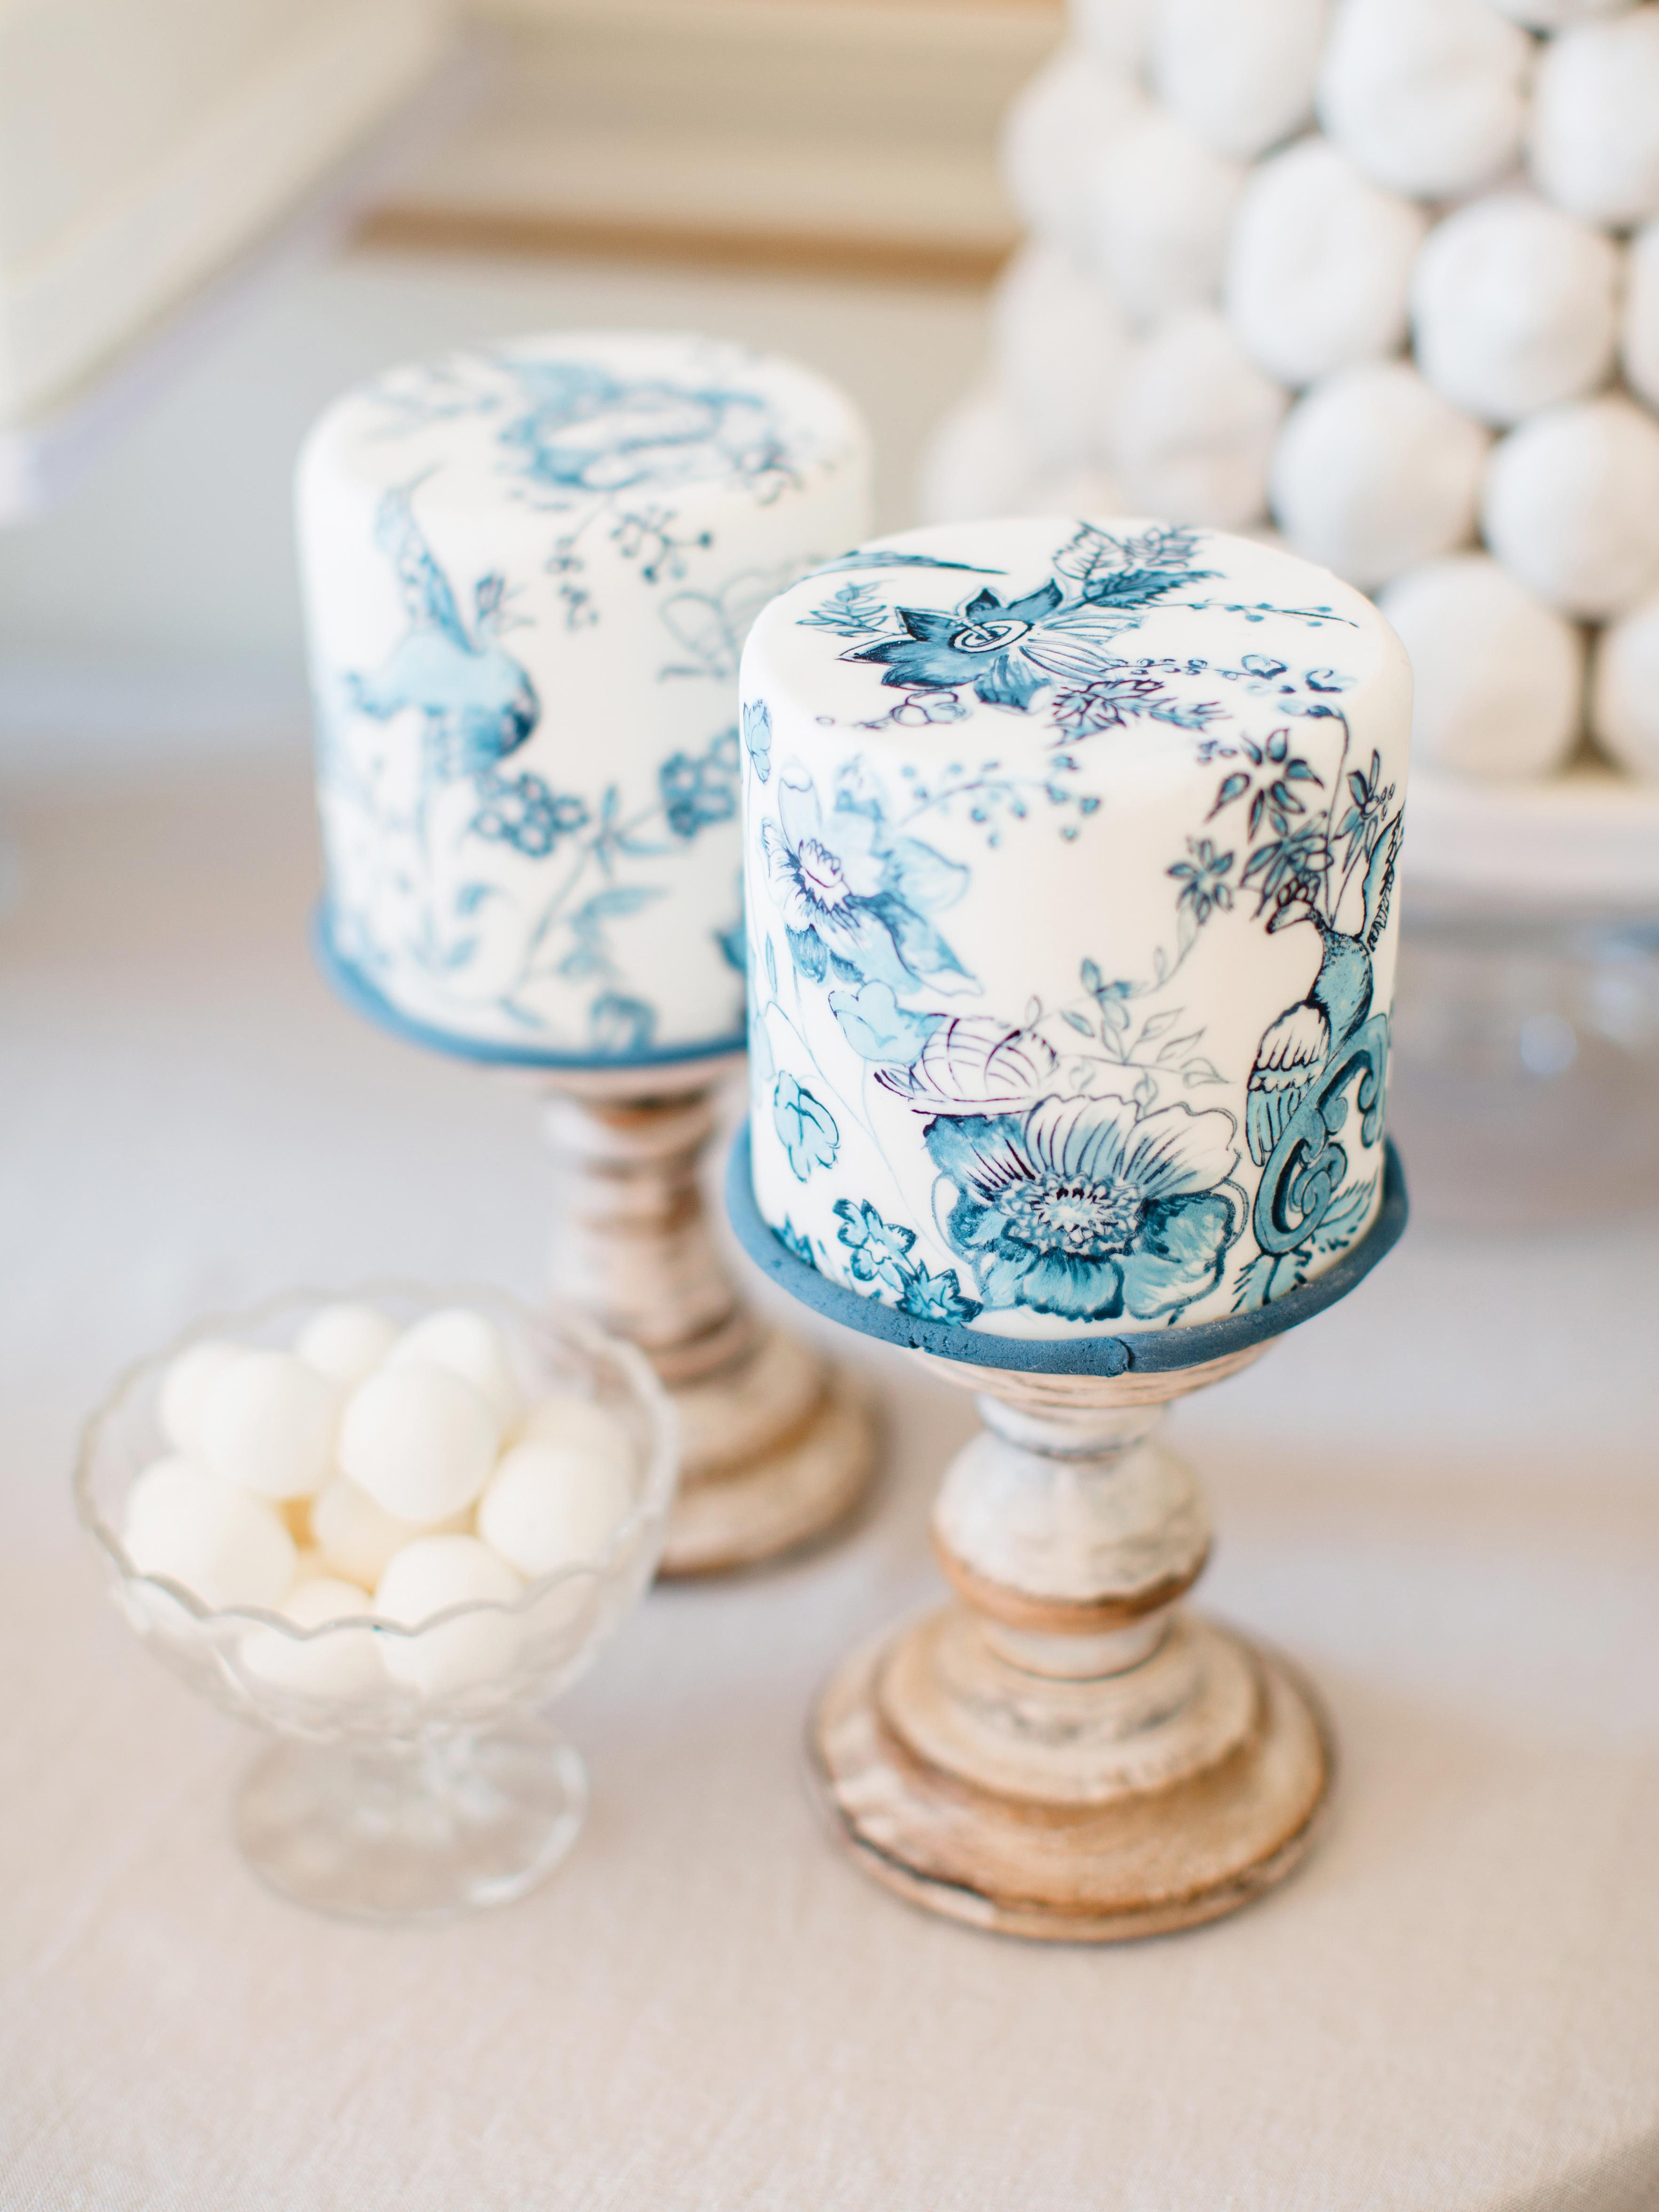 Trending Now: Dutch Delft and Chinoiserie-Inspired Wedding D?cor -   19 cake Mini wedding ideas